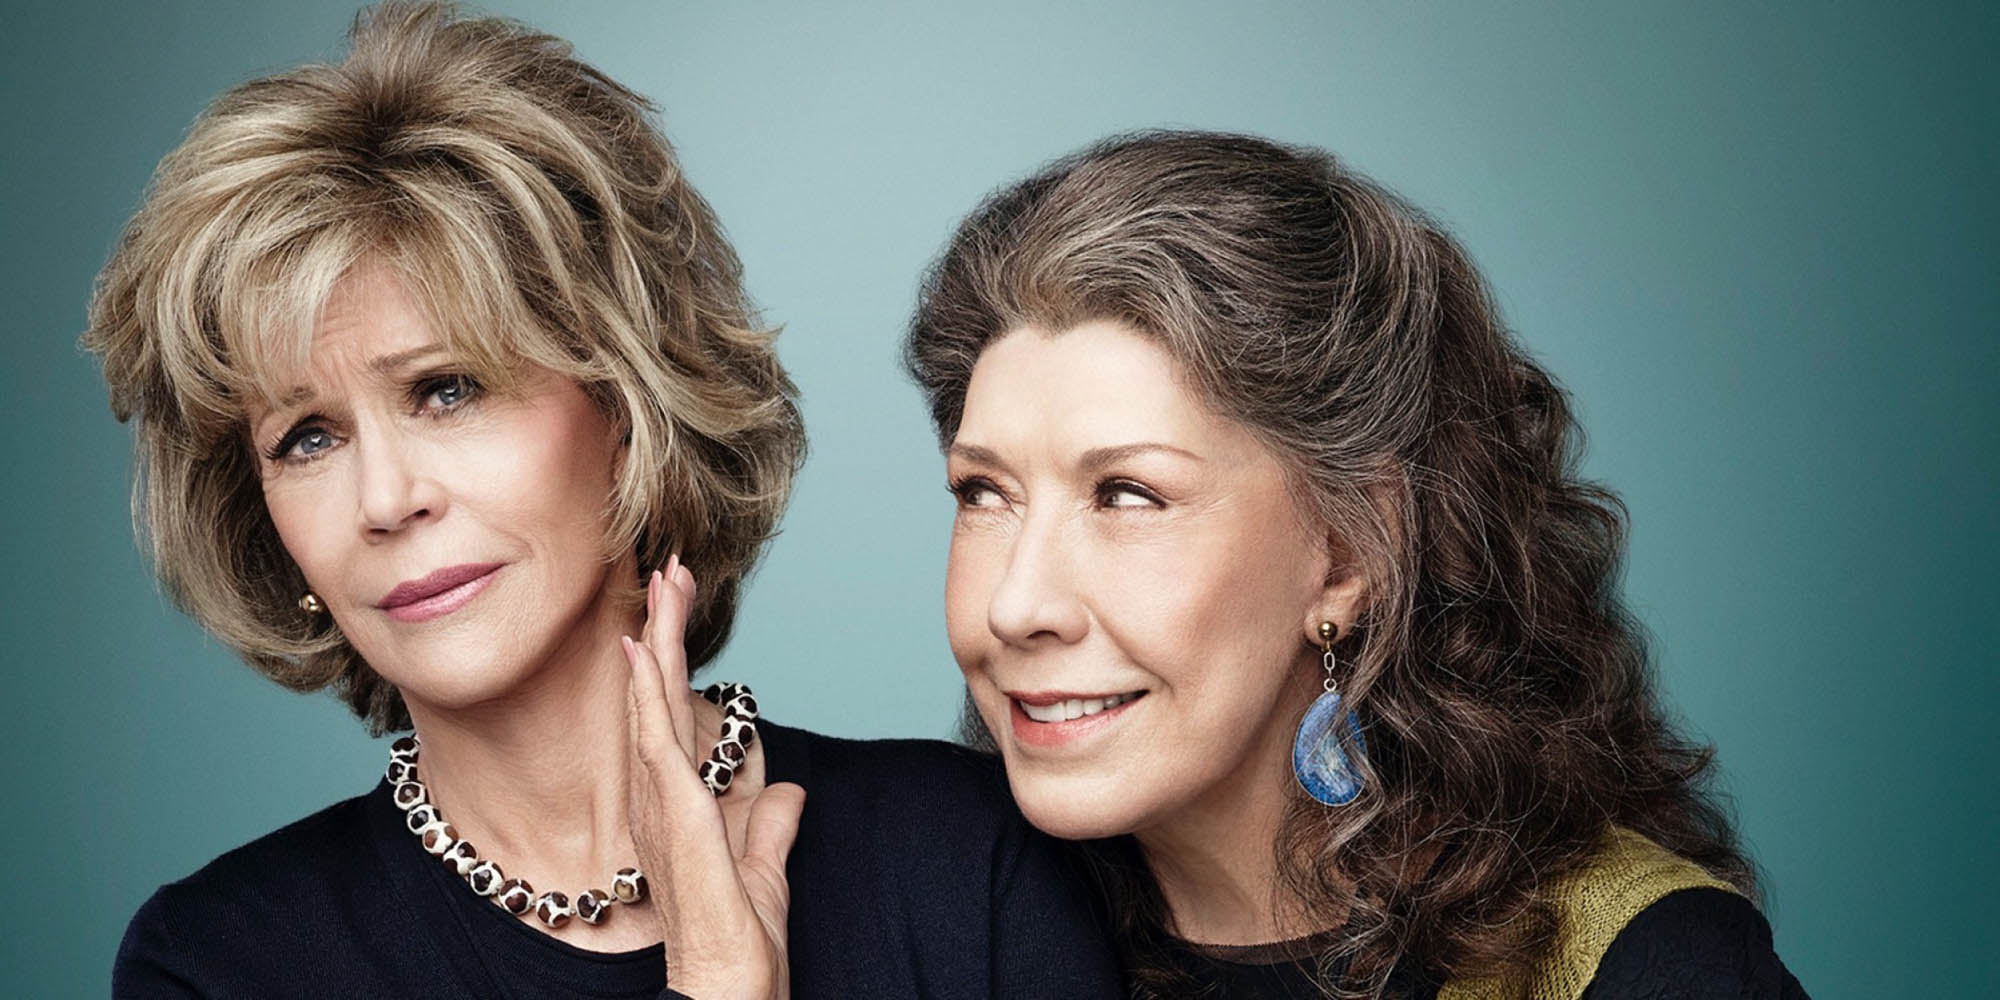 Let's revisit some moments from 'Grace and Frankie', one of the most complex and realistic portrayals of female friendship on TV, concerning friendship.